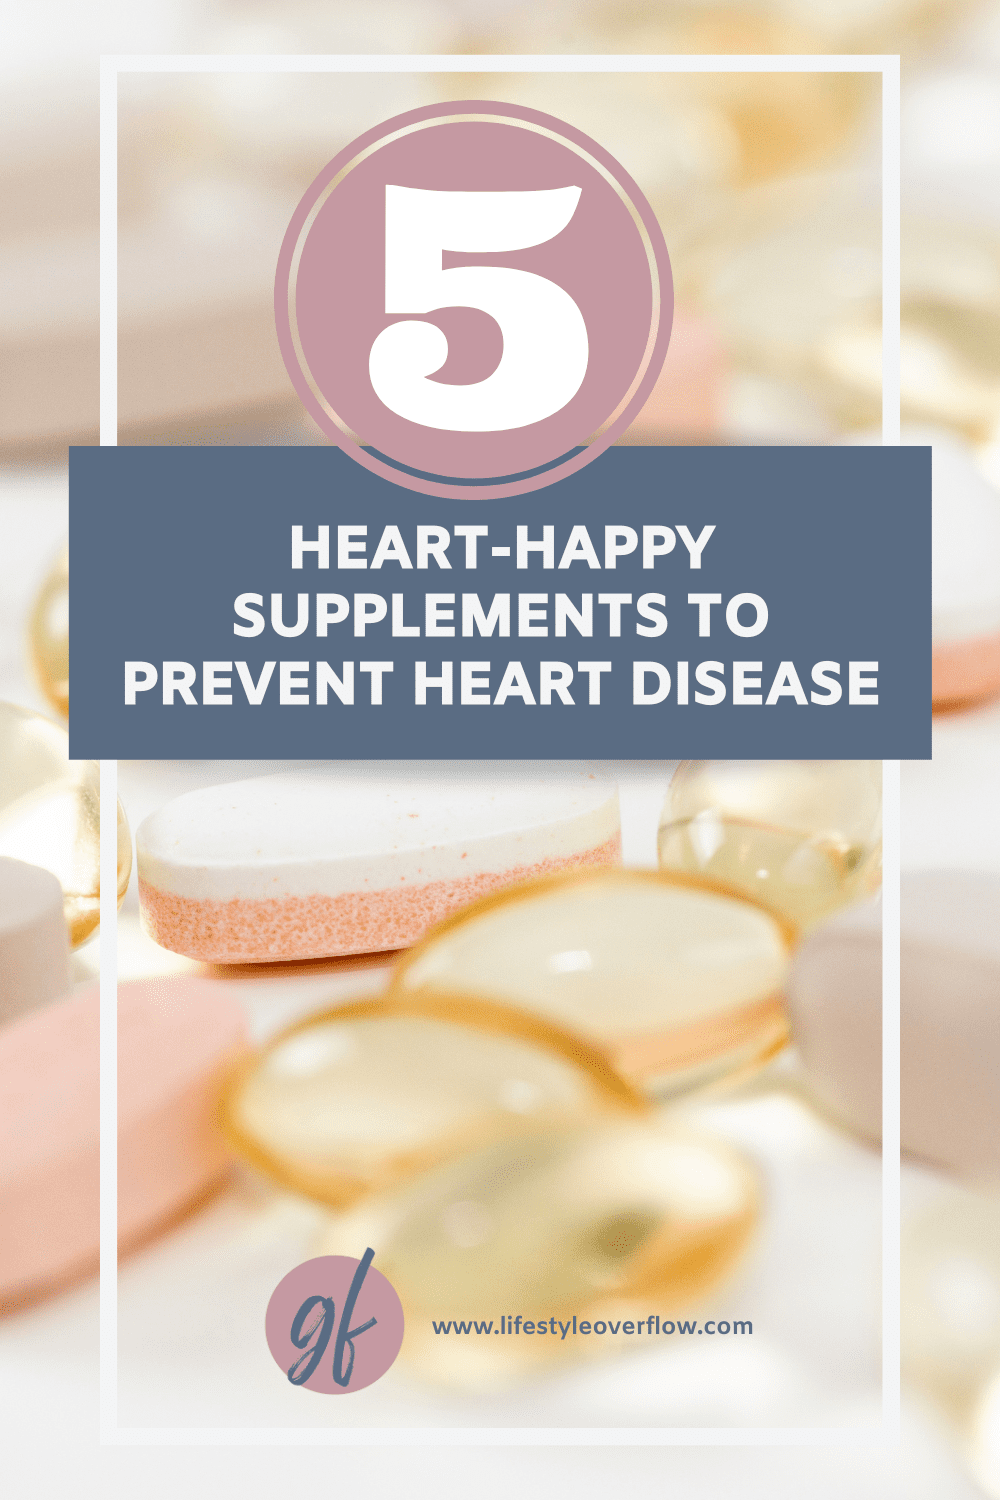 soft pink and blue graphic with a photo of pills/supplements with text: 5 heart-happy supplements to prevent heart disease by Gina Forcatto